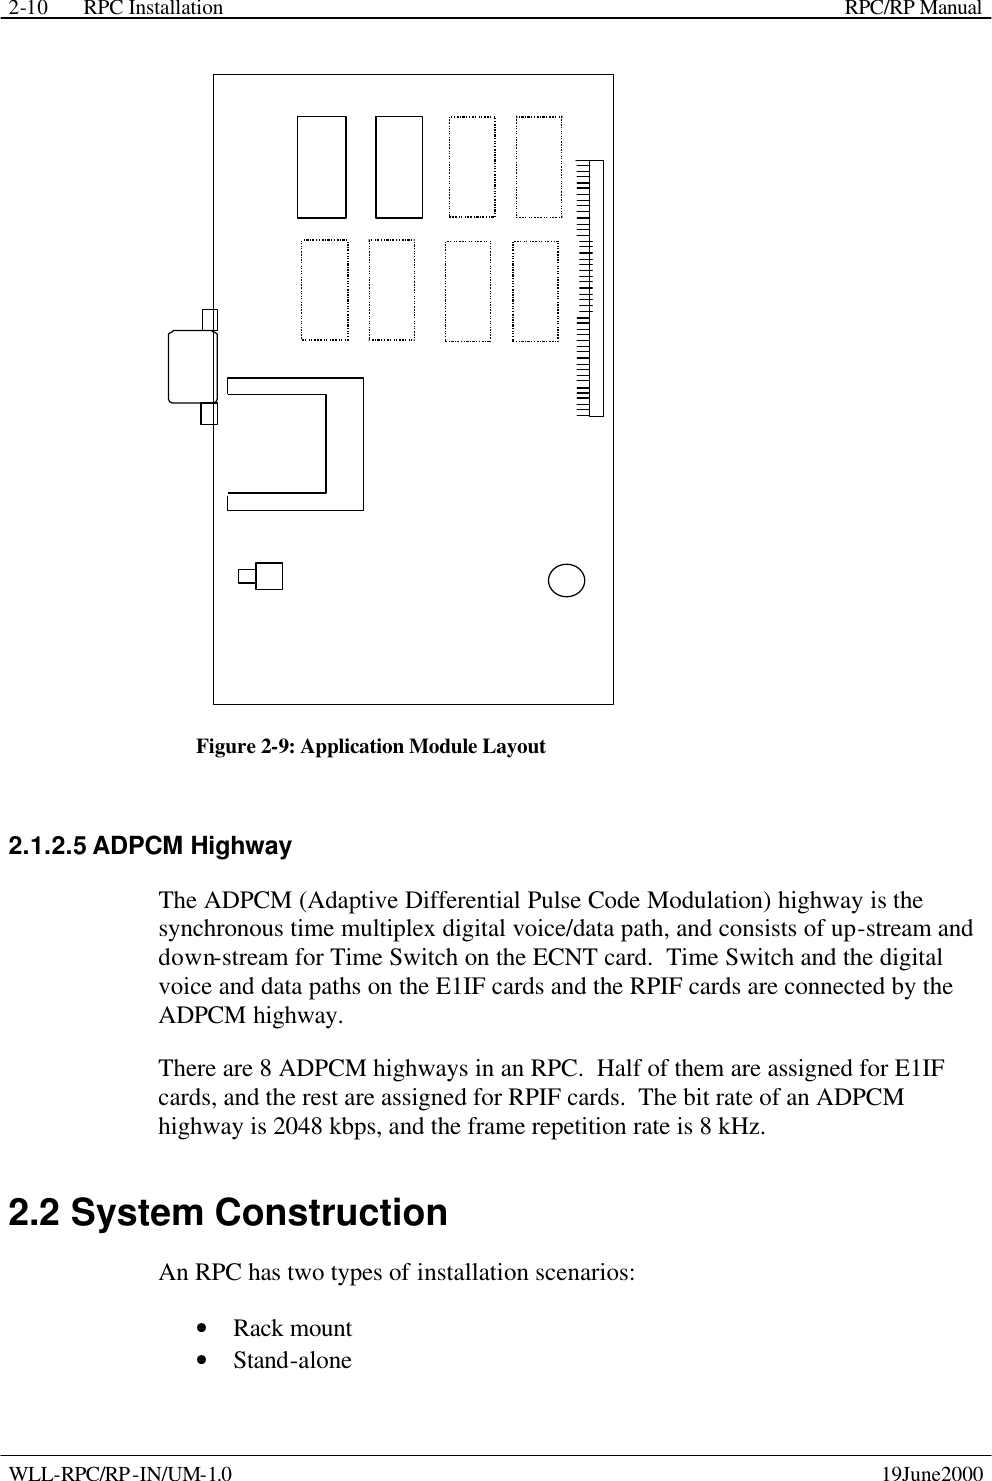 RPC Installation    RPC/RP Manual WLL-RPC/RP-IN/UM-1.0    19June2000 2-10 Figure 2-9: Application Module Layout 2.1.2.5 ADPCM Highway The ADPCM (Adaptive Differential Pulse Code Modulation) highway is the synchronous time multiplex digital voice/data path, and consists of up-stream and down-stream for Time Switch on the ECNT card.  Time Switch and the digital voice and data paths on the E1IF cards and the RPIF cards are connected by the ADPCM highway. There are 8 ADPCM highways in an RPC.  Half of them are assigned for E1IF cards, and the rest are assigned for RPIF cards.  The bit rate of an ADPCM highway is 2048 kbps, and the frame repetition rate is 8 kHz. 2.2 System Construction An RPC has two types of installation scenarios: • Rack mount  • Stand-alone  